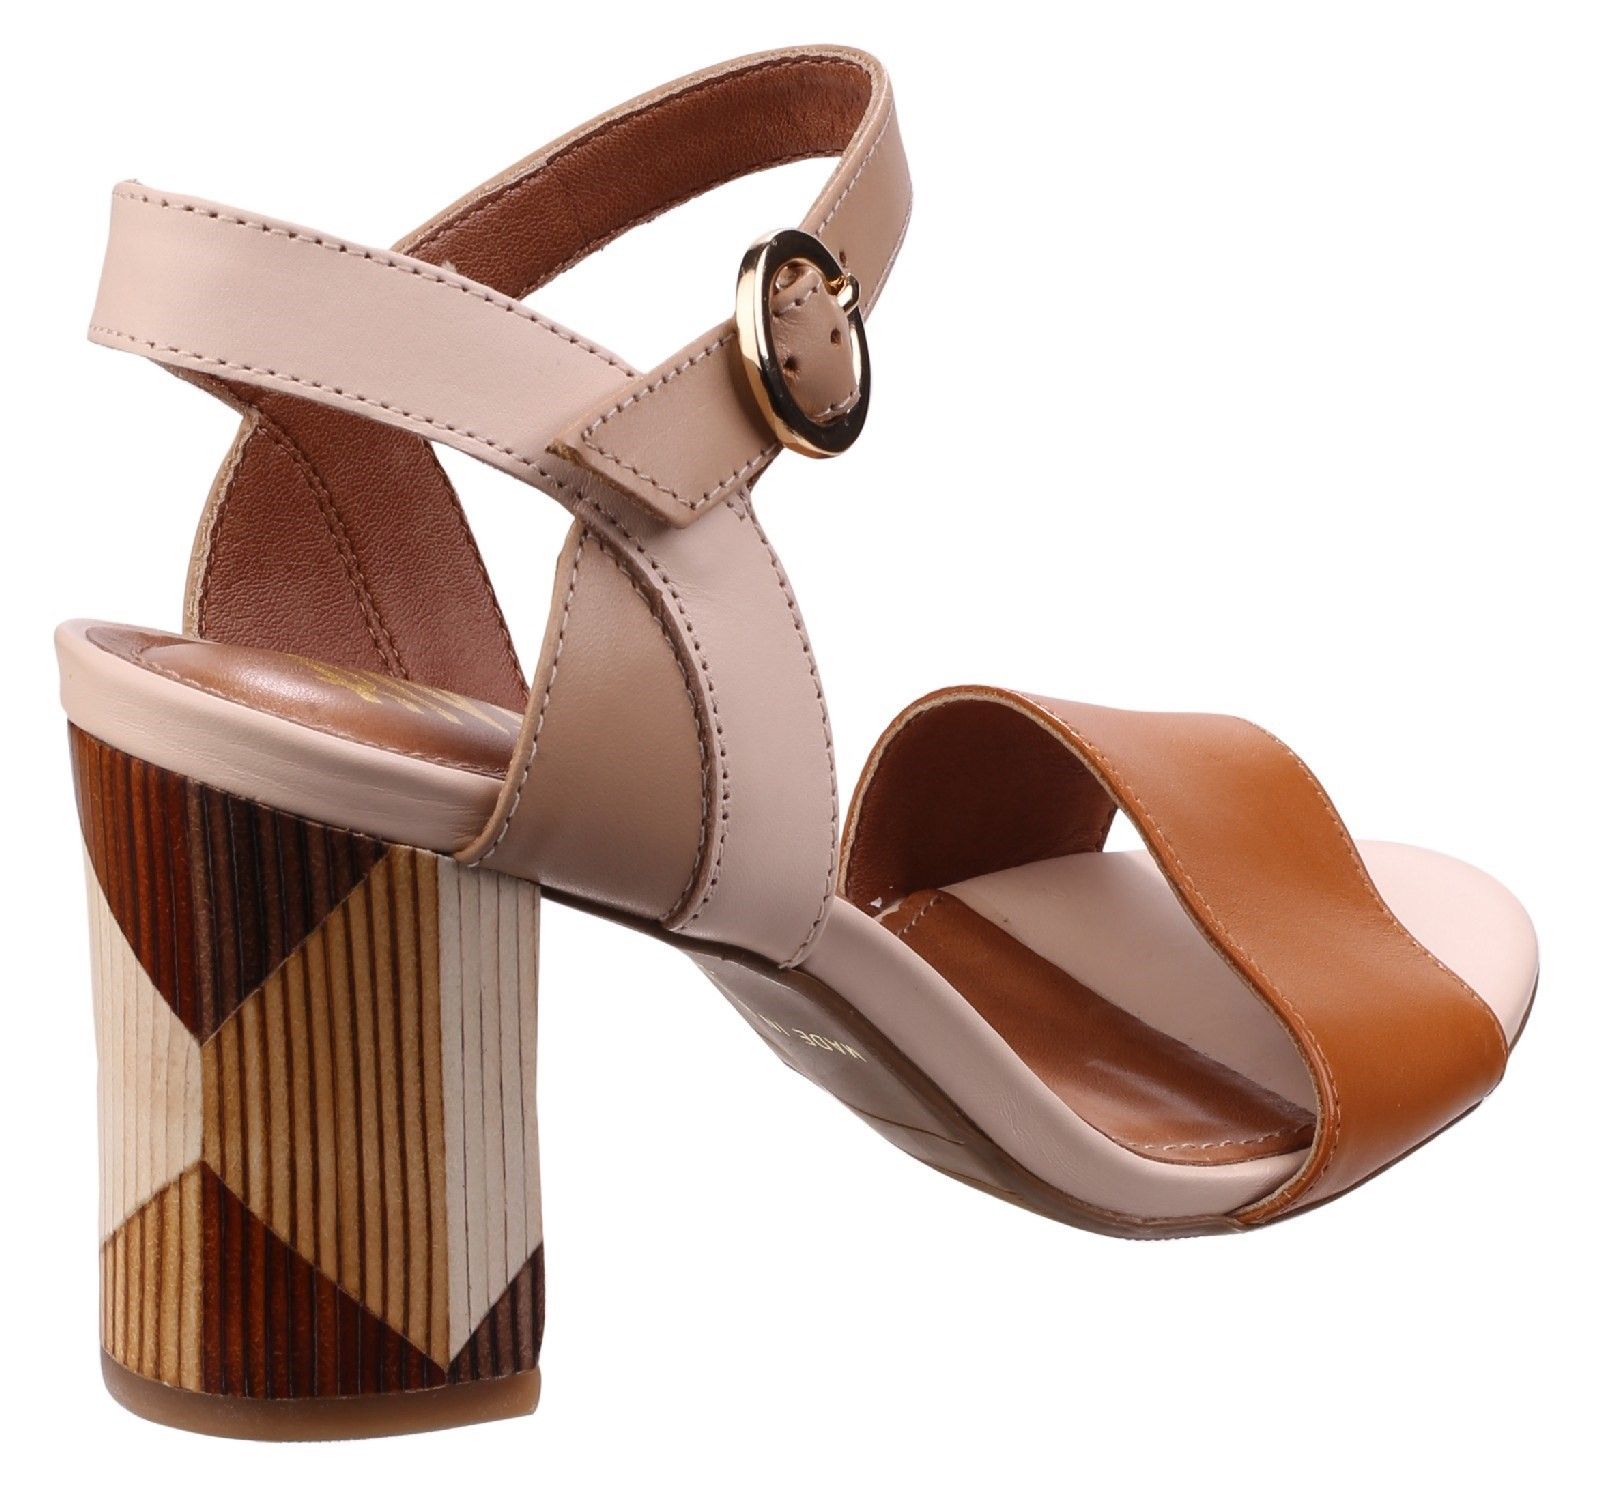 Womens striking hot heels in eye-catching open toe styling crafted with luxury multi coloured smooth leather uppers and mid-height block heel. Beautifully crafted ladies sandal with luxury smooth leather upper. 
Elegant open-toe styling using single bar strap. 
Contoured brightly coloured sling back ankle strap. 
Fitting front strap with adjustable buckle closure. 
Soft leather lining comfortable bear-foot.